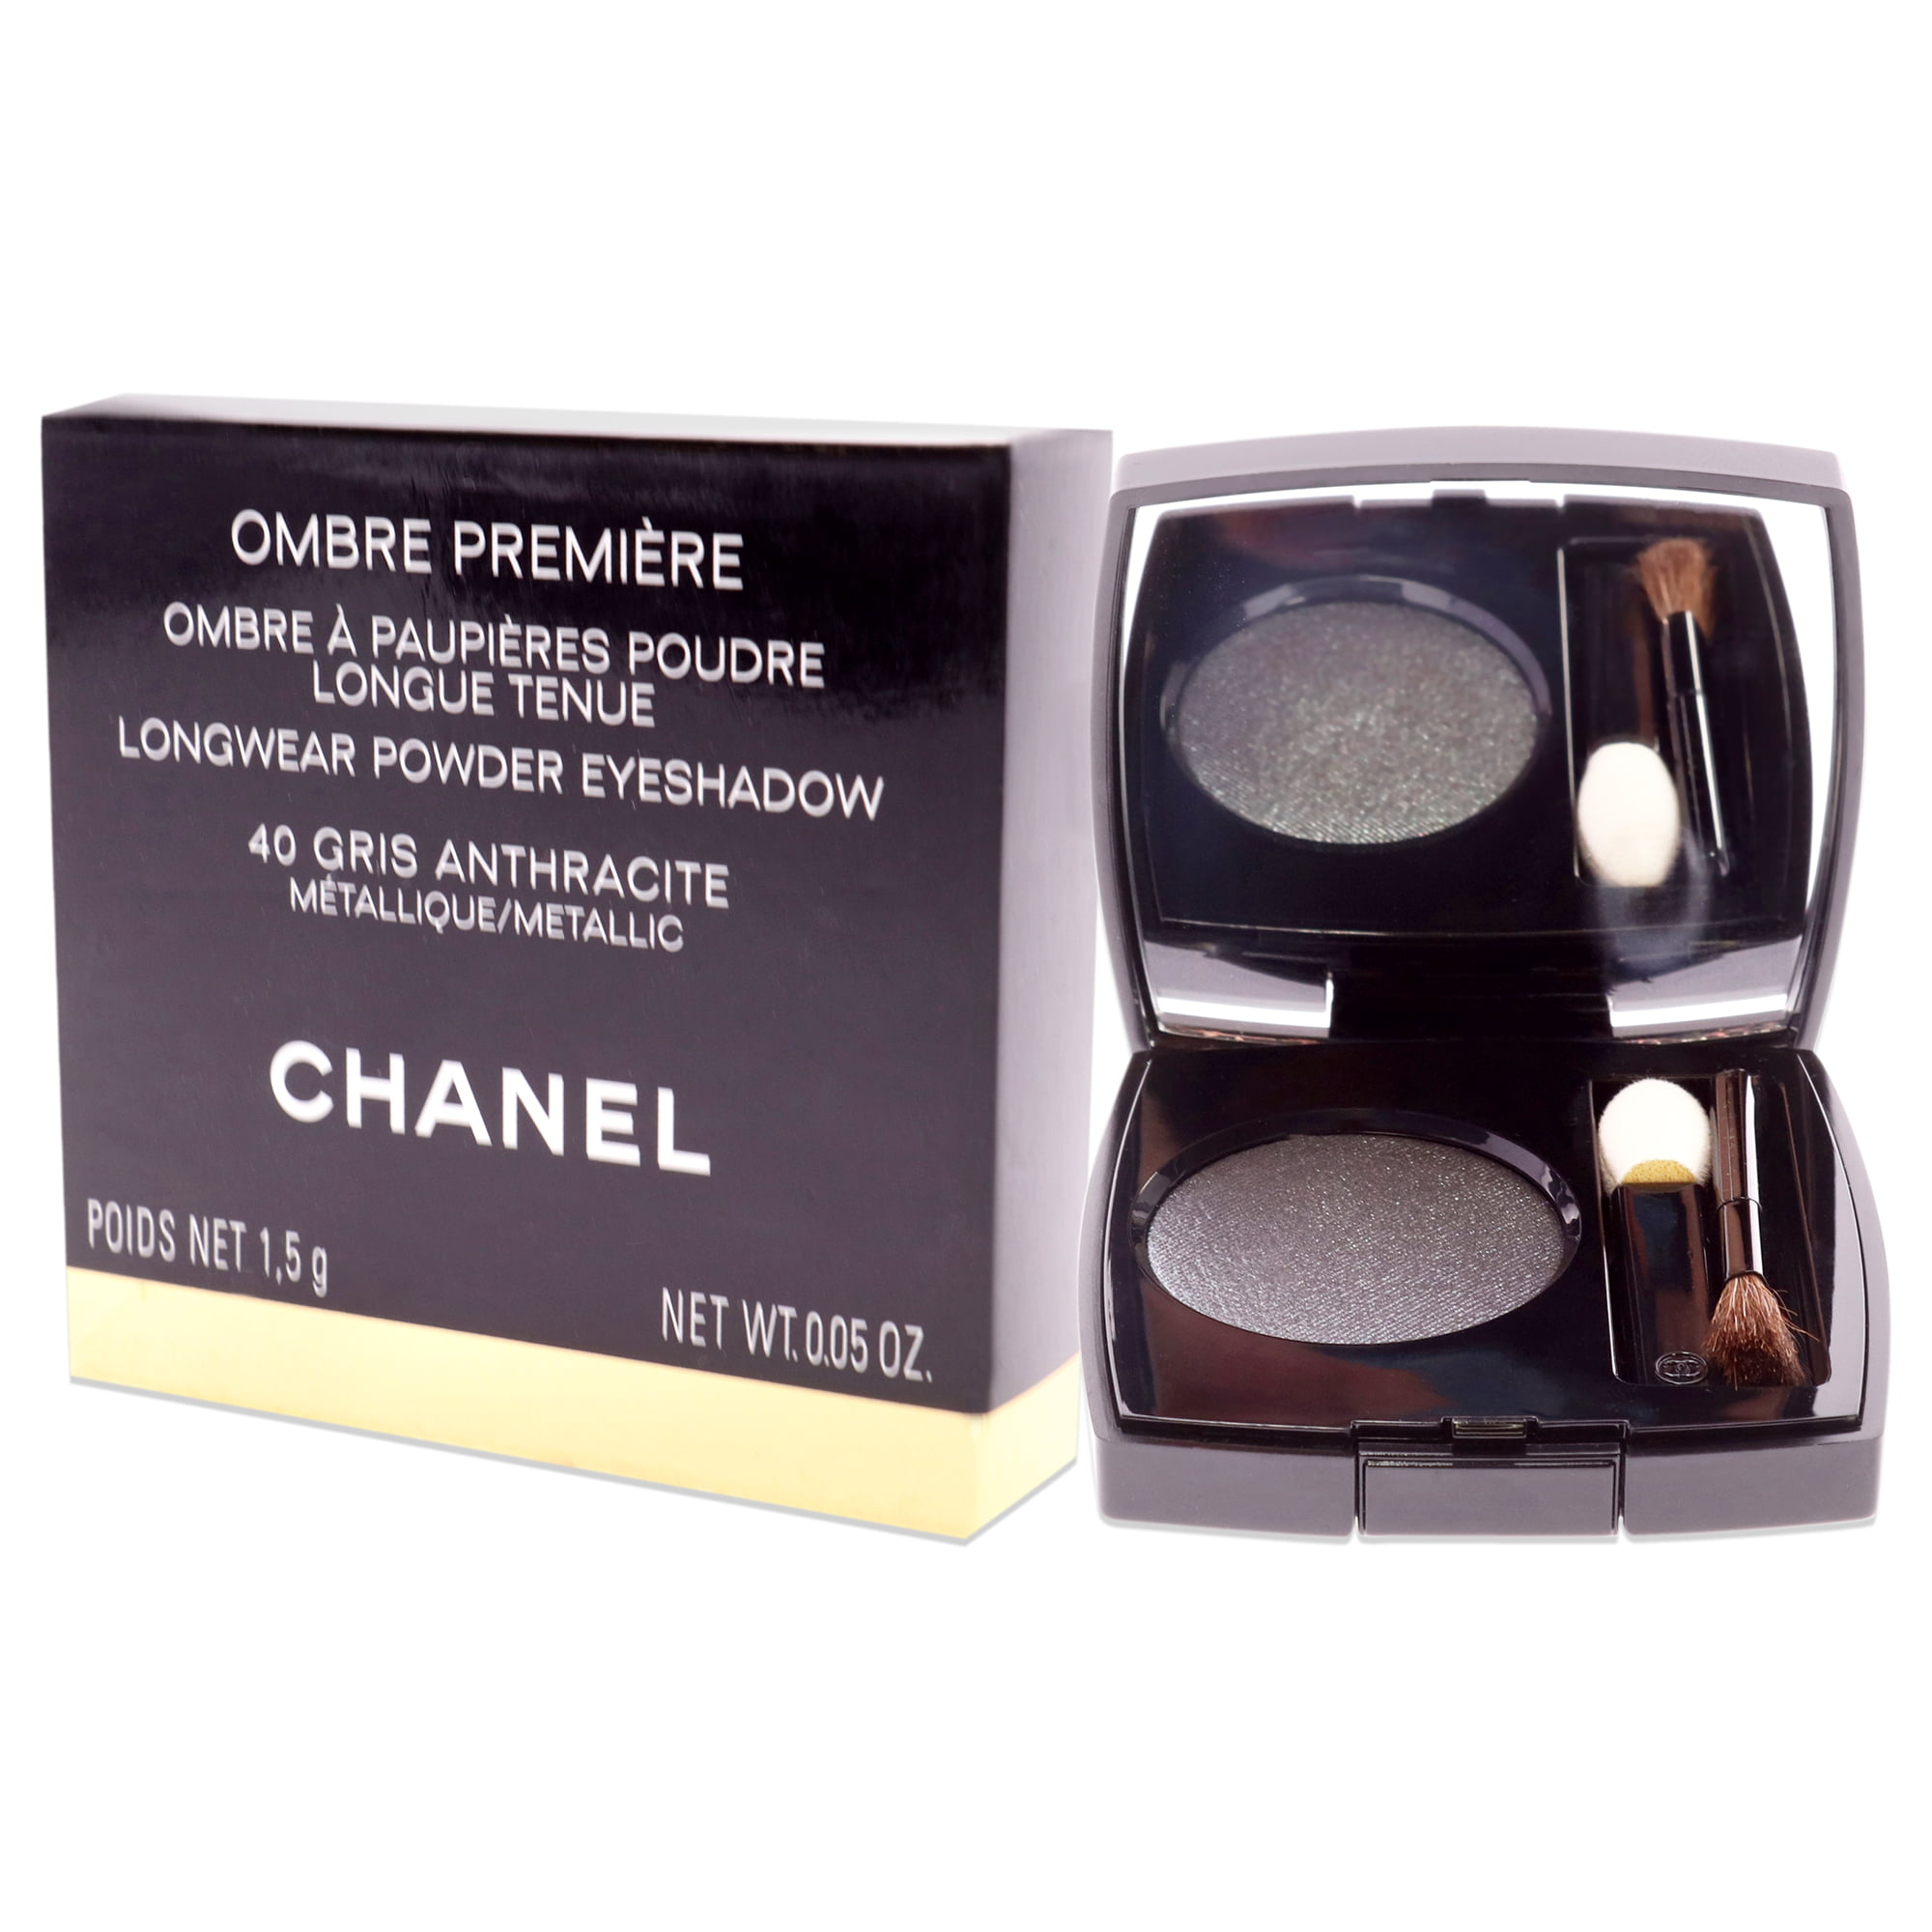 Chanel Ombre Premiere Eyeshadow: Review & Swatches – the beauty